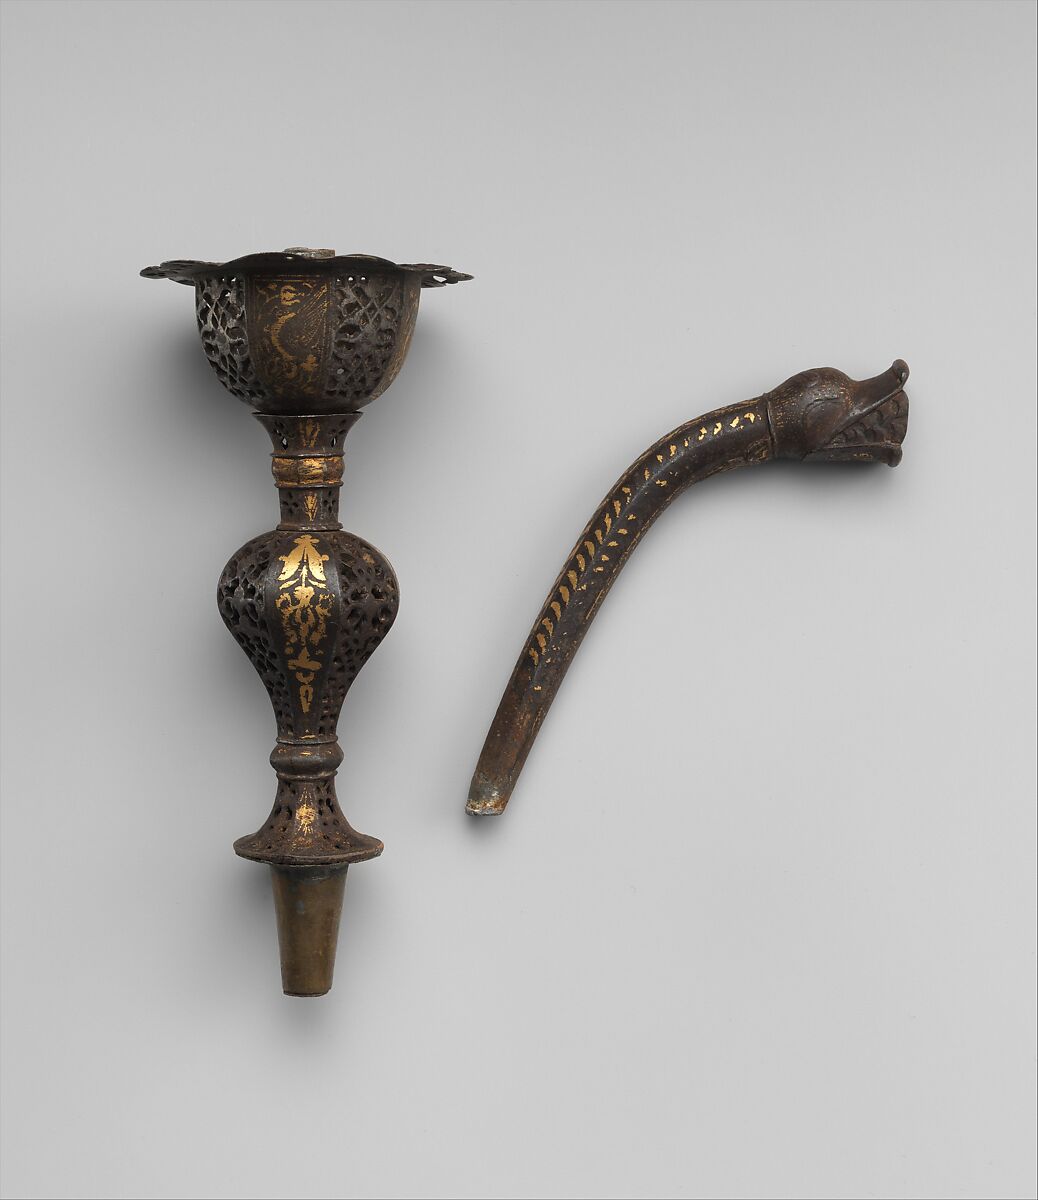 Water Pipe Part, Copper alloy, steel; upper part engraved, silvered, and gilded